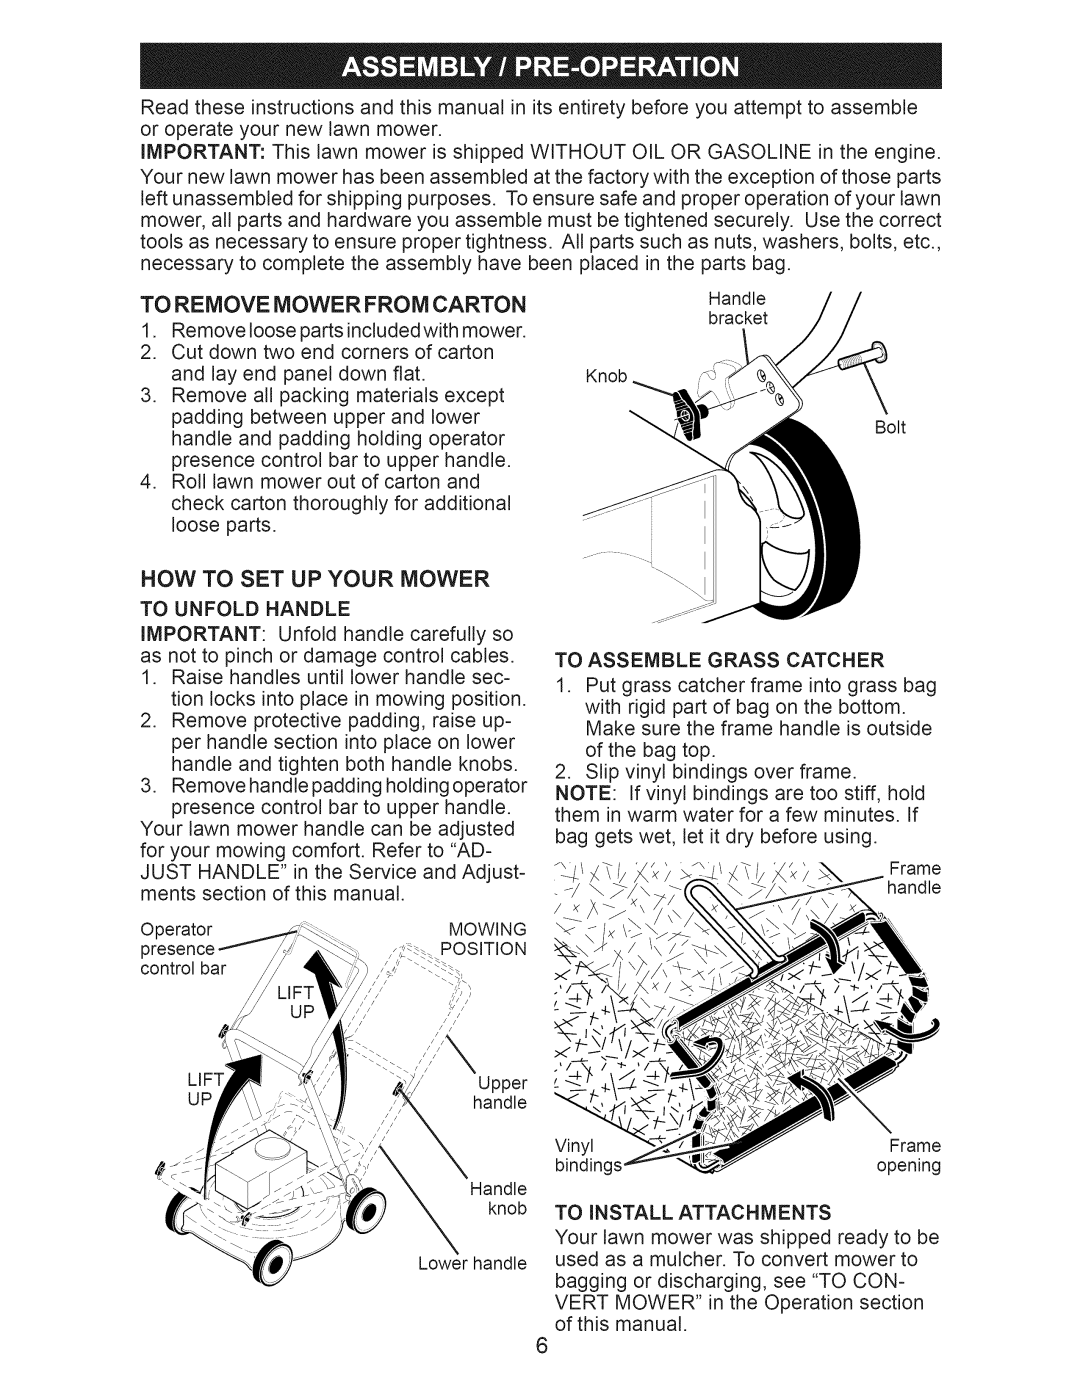 Craftsman 917.376231 owner manual To Remove Mower From Carton, Now To Set Up Your Mower 